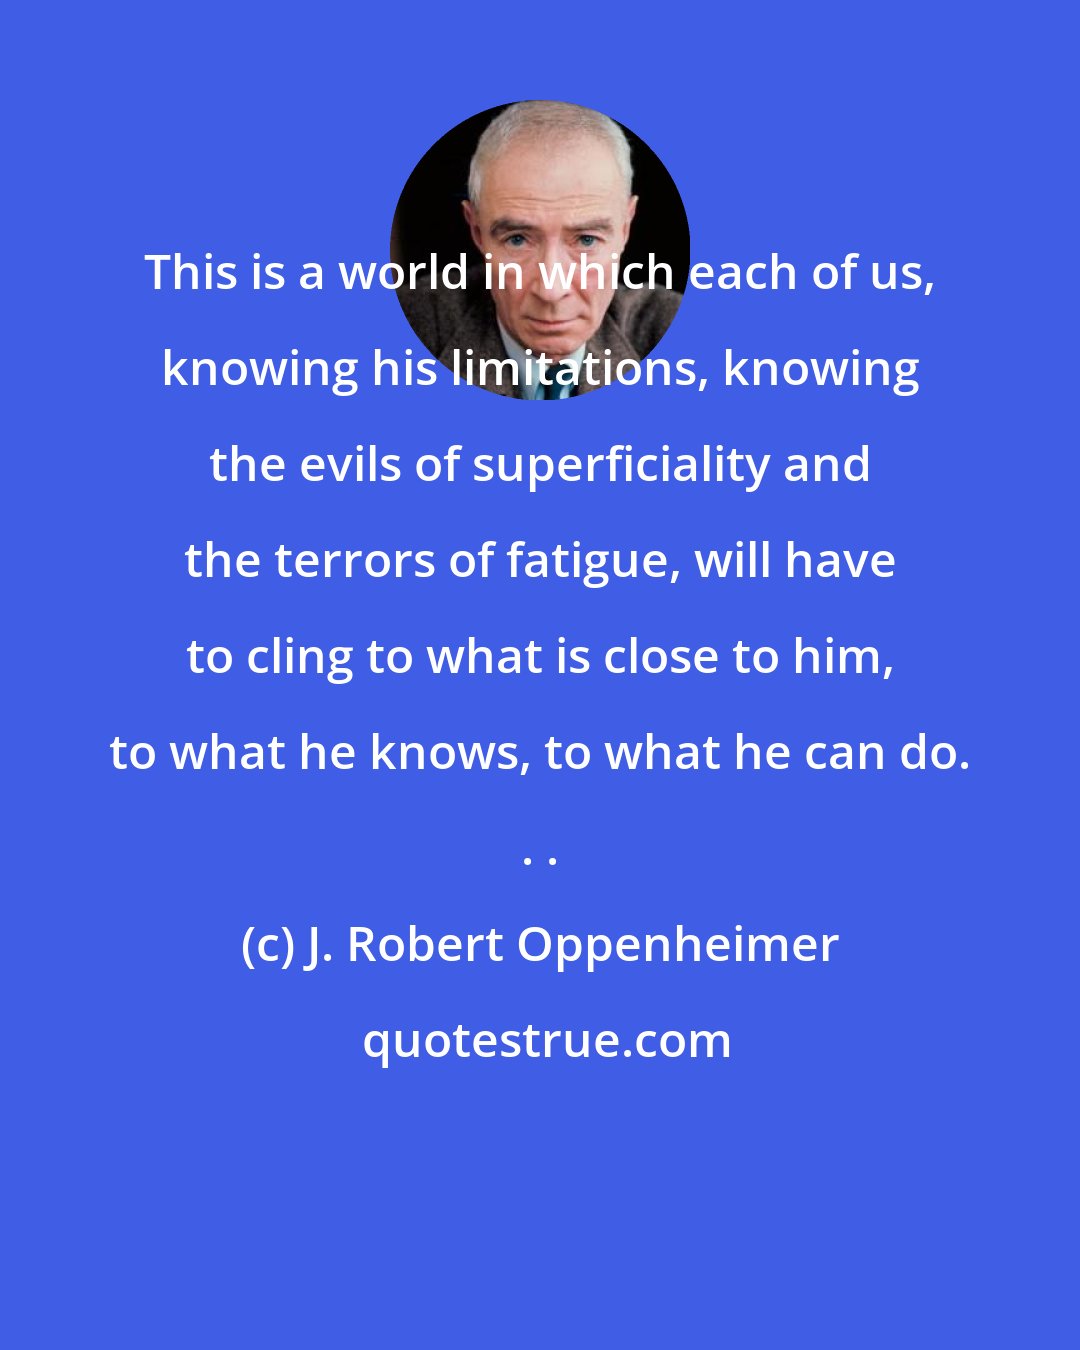 J. Robert Oppenheimer: This is a world in which each of us, knowing his limitations, knowing the evils of superficiality and the terrors of fatigue, will have to cling to what is close to him, to what he knows, to what he can do. . .